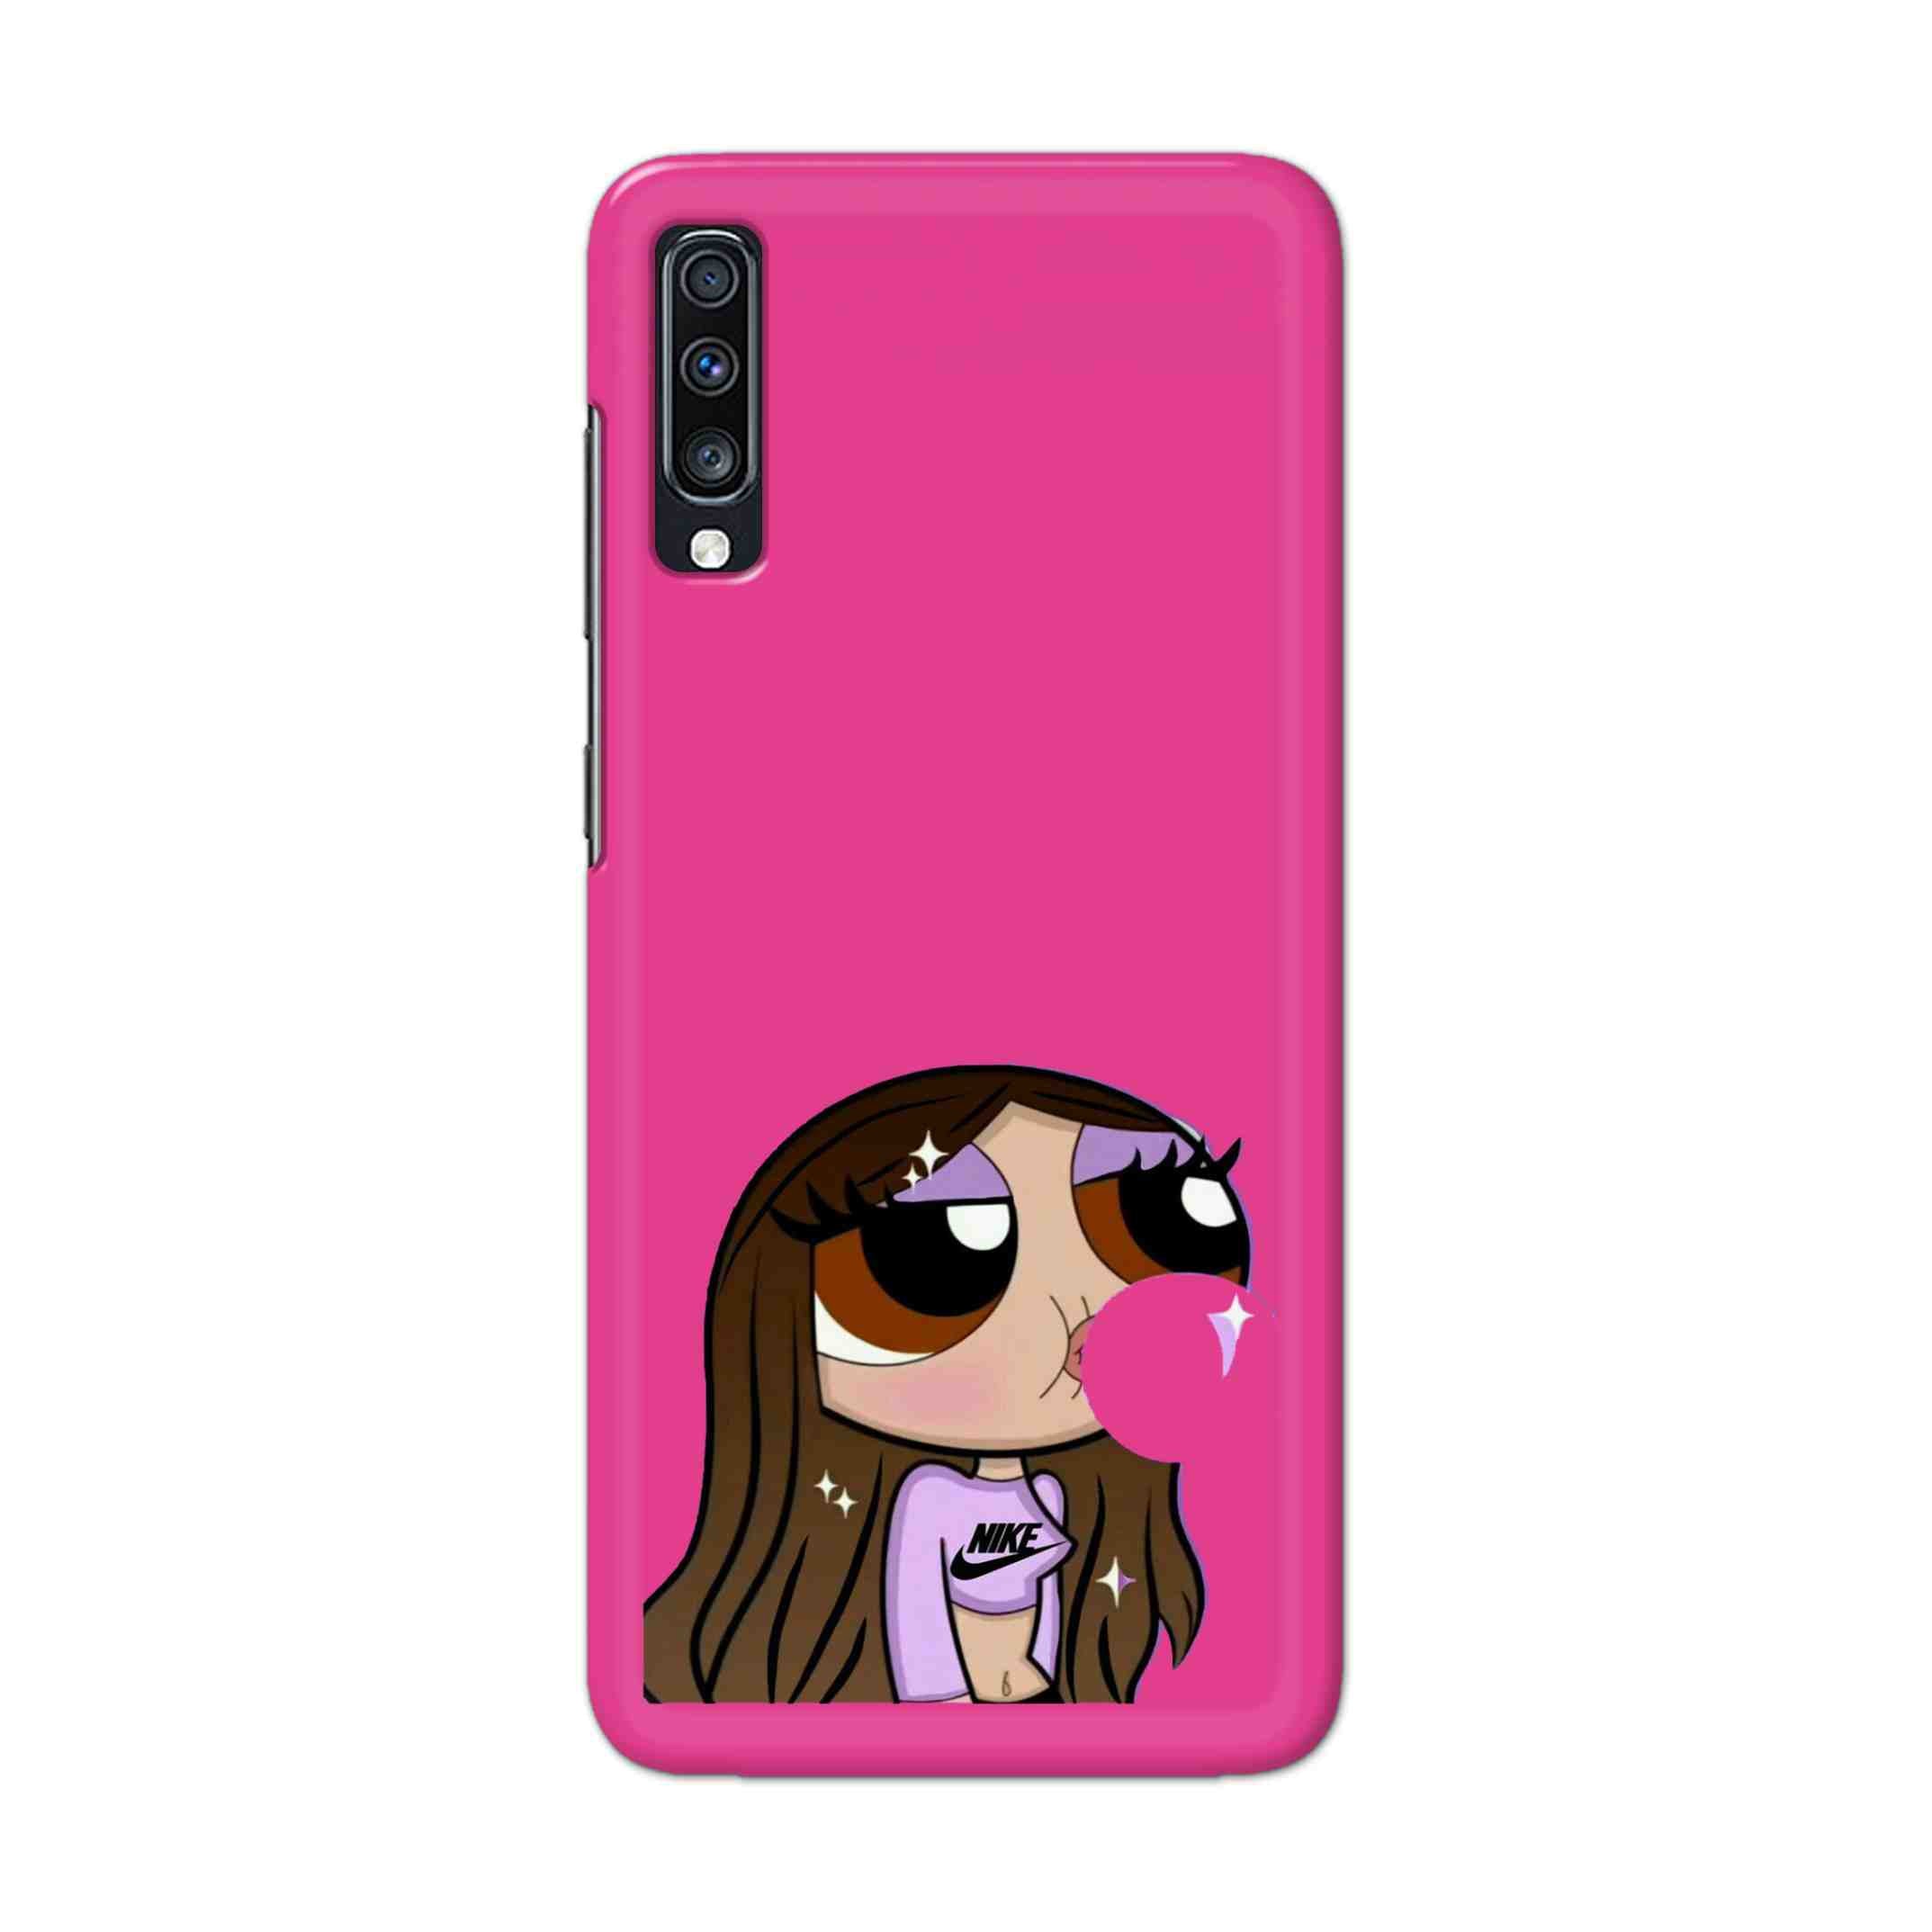 Buy Bubble Girl Hard Back Mobile Phone Case Cover For Samsung Galaxy A70 Online